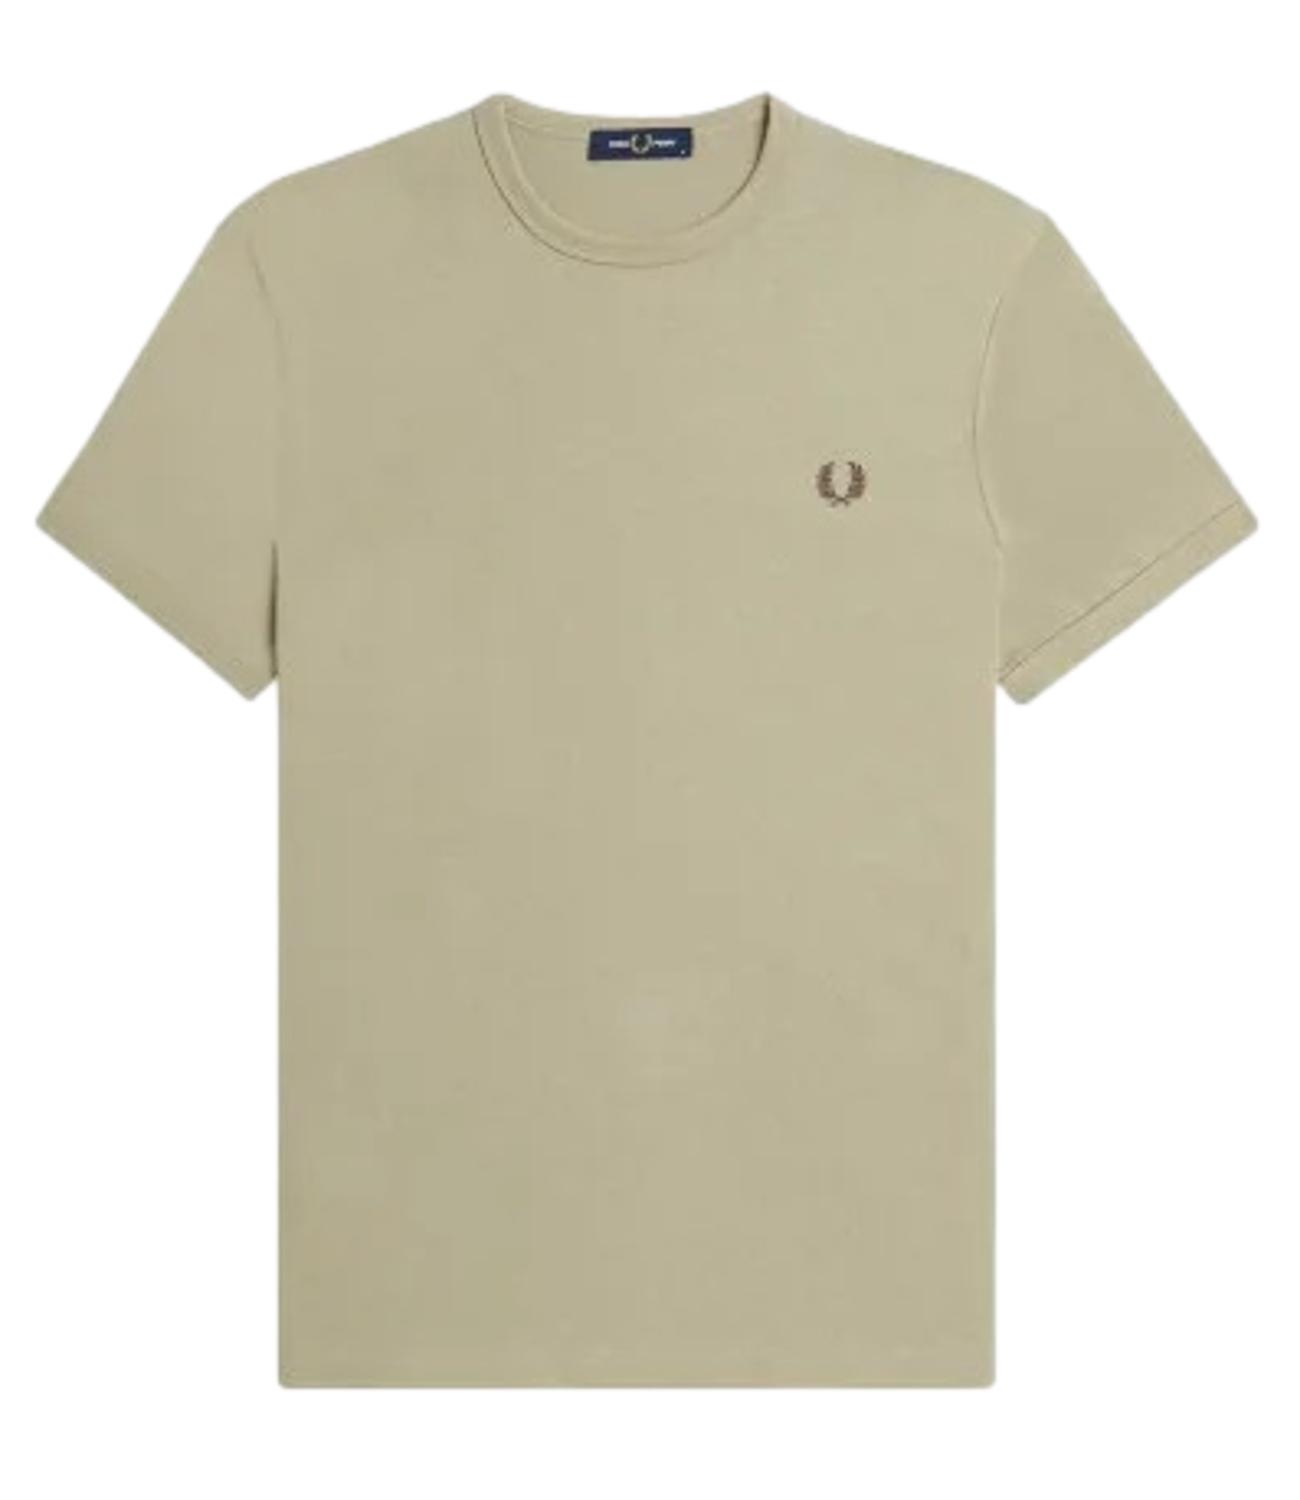 Fred Perry t-shirt bordeaux uomo ringer